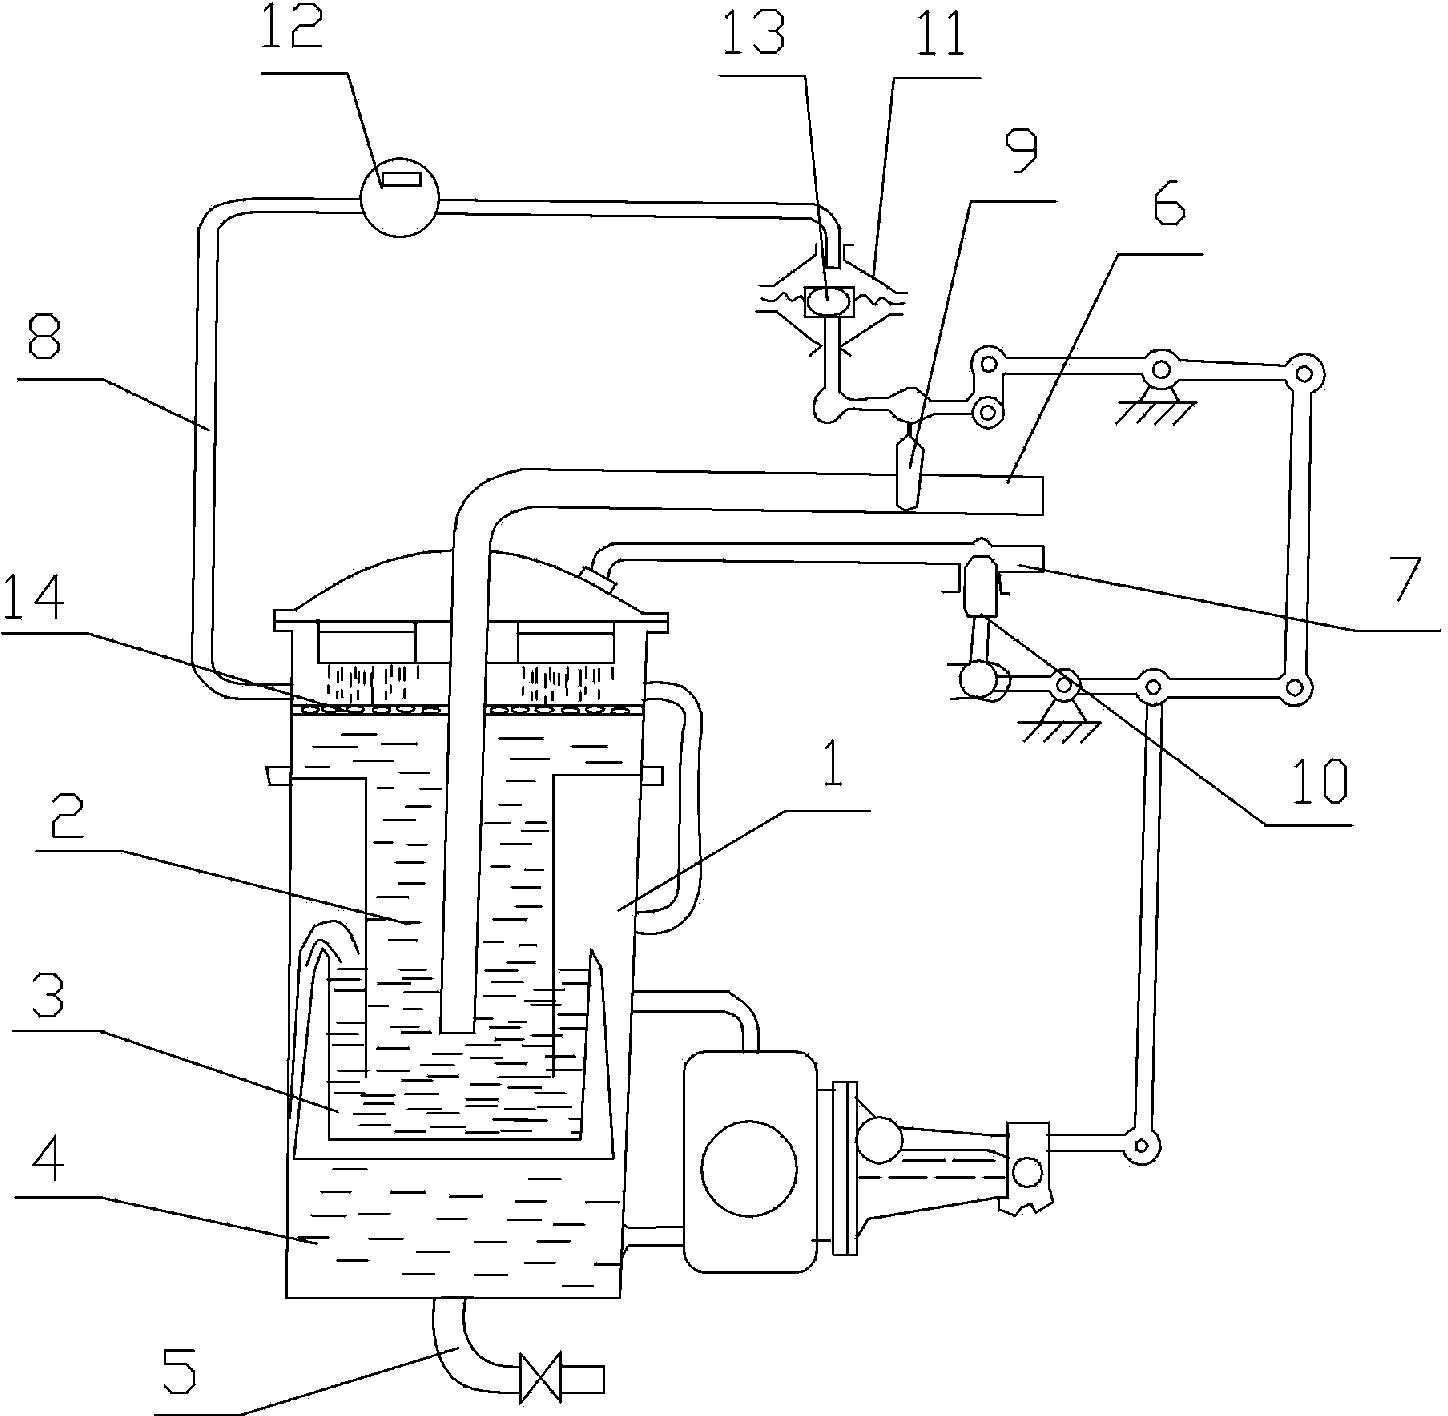 Pressure regulating device used for water supply and degassing of boiler